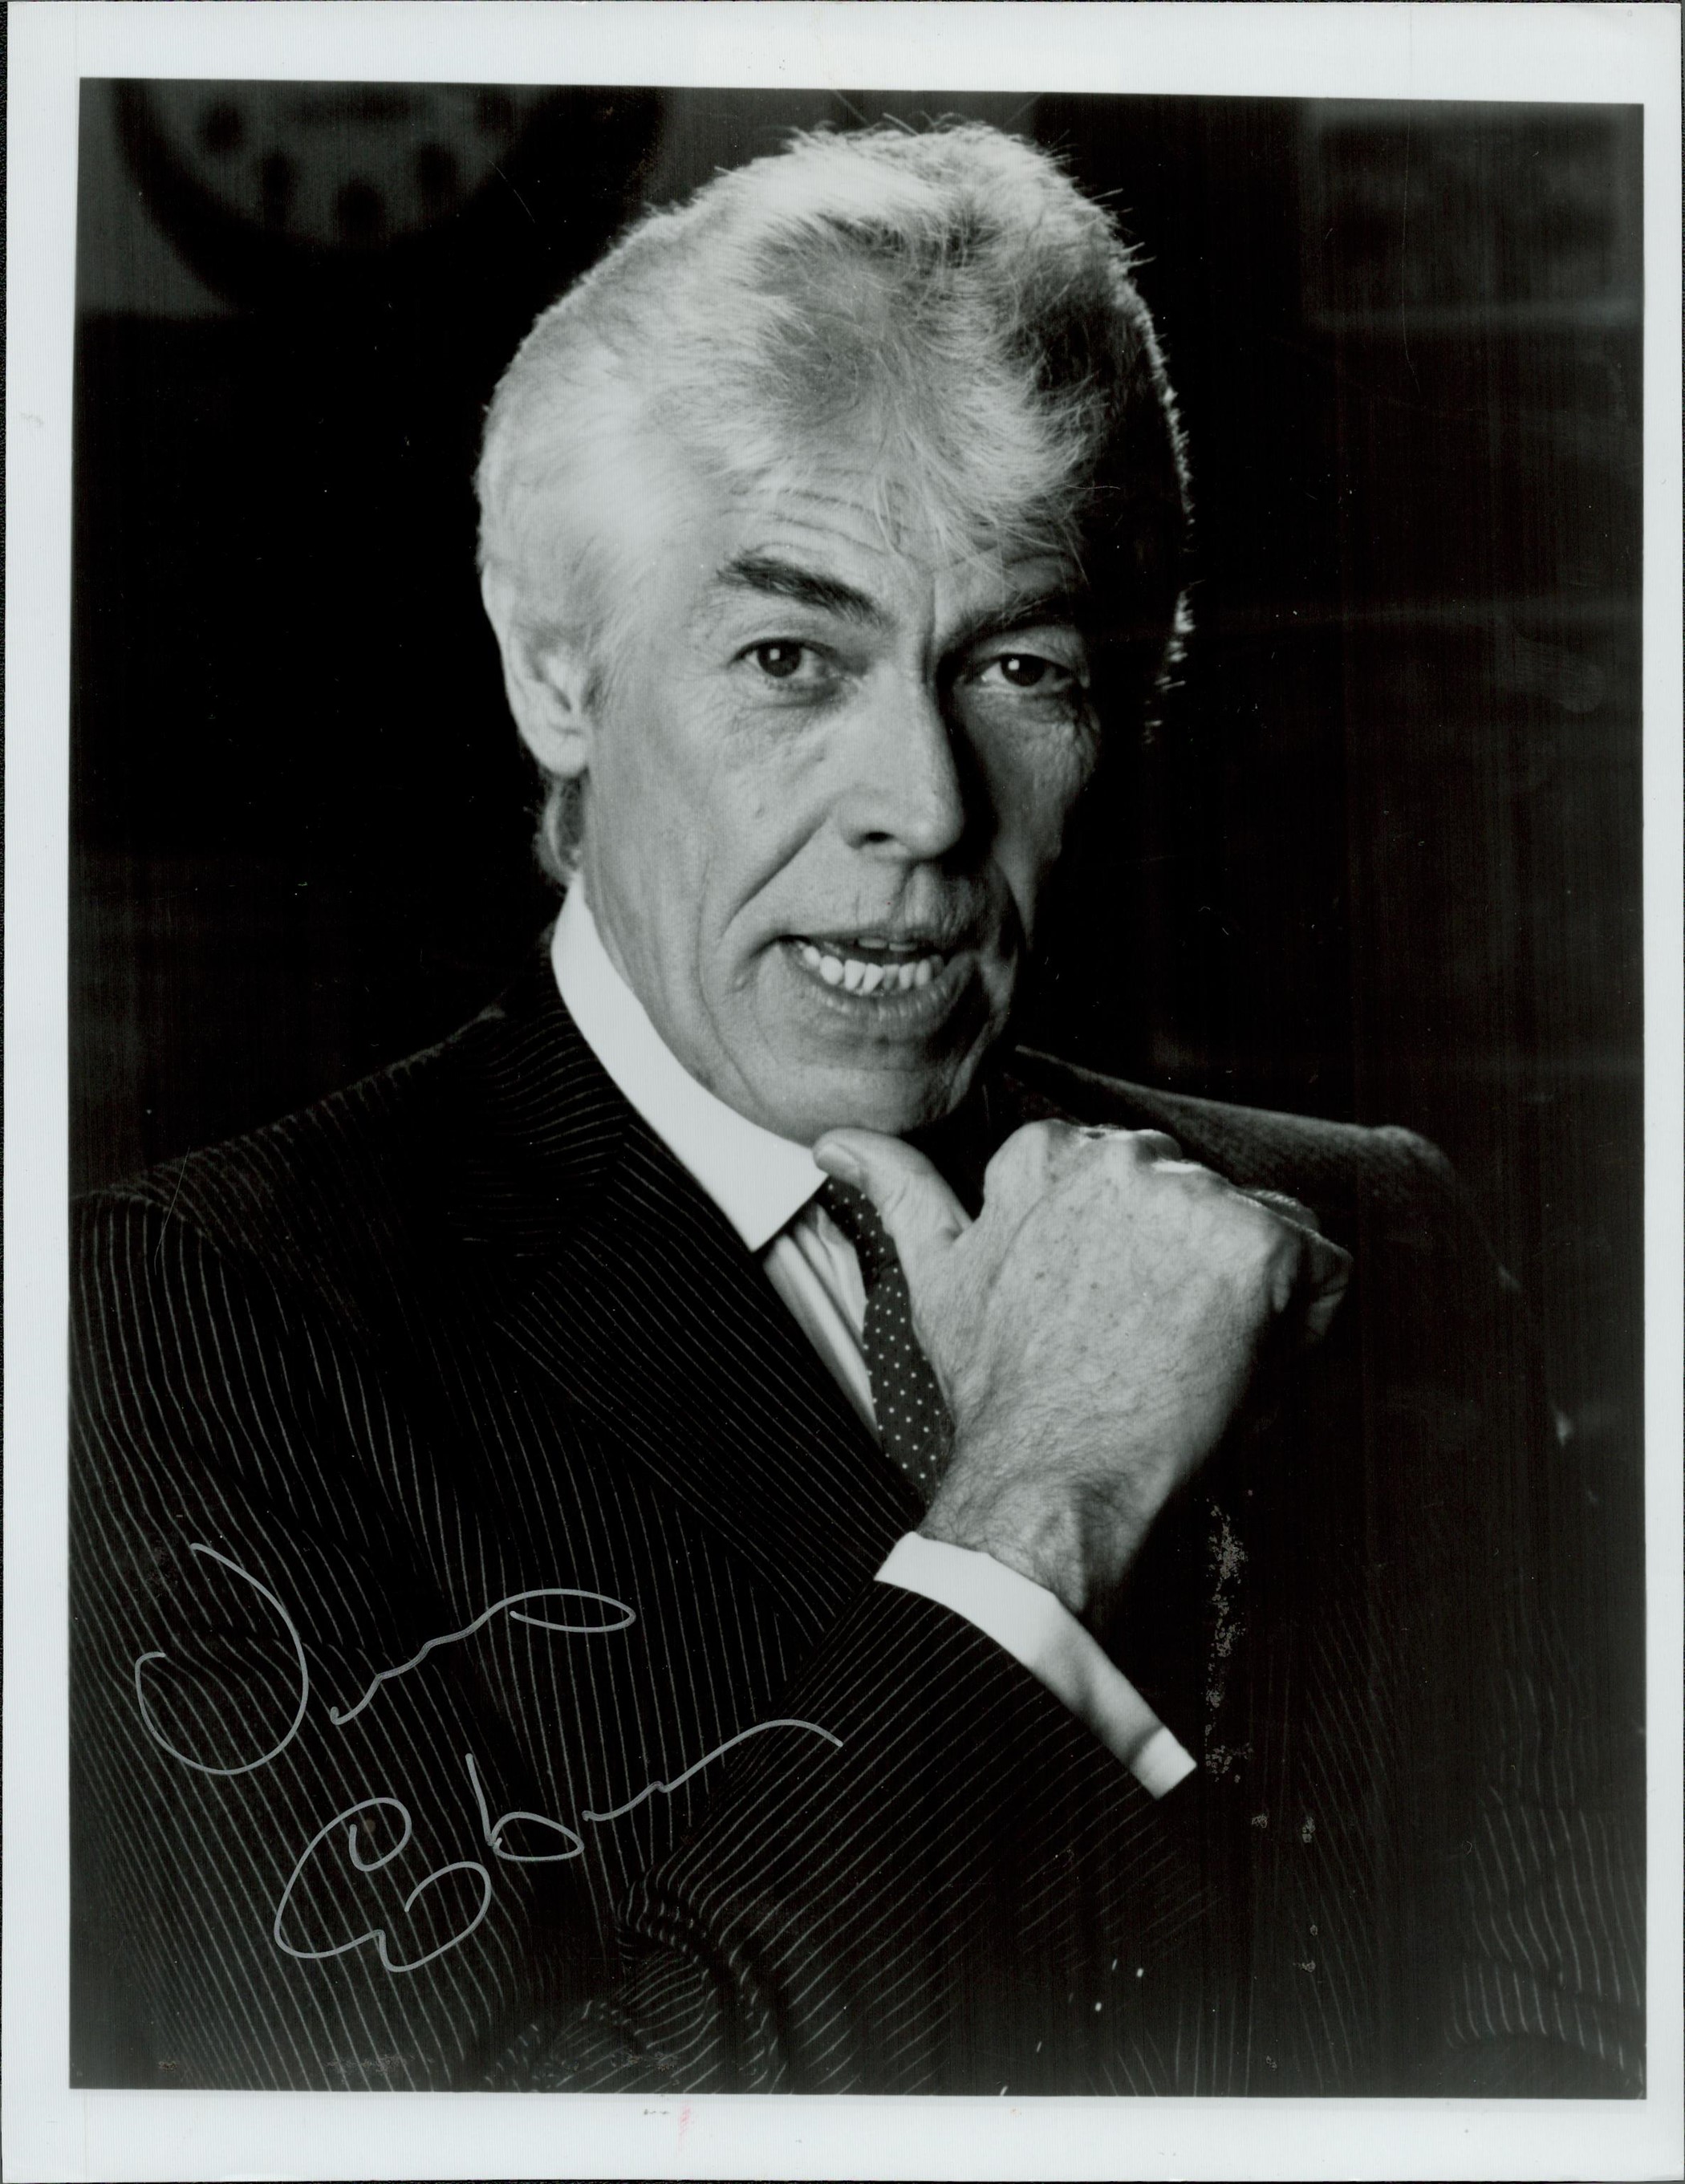 James Coburn signed 10x8 black and white photographAll autographs come with a Certificate of